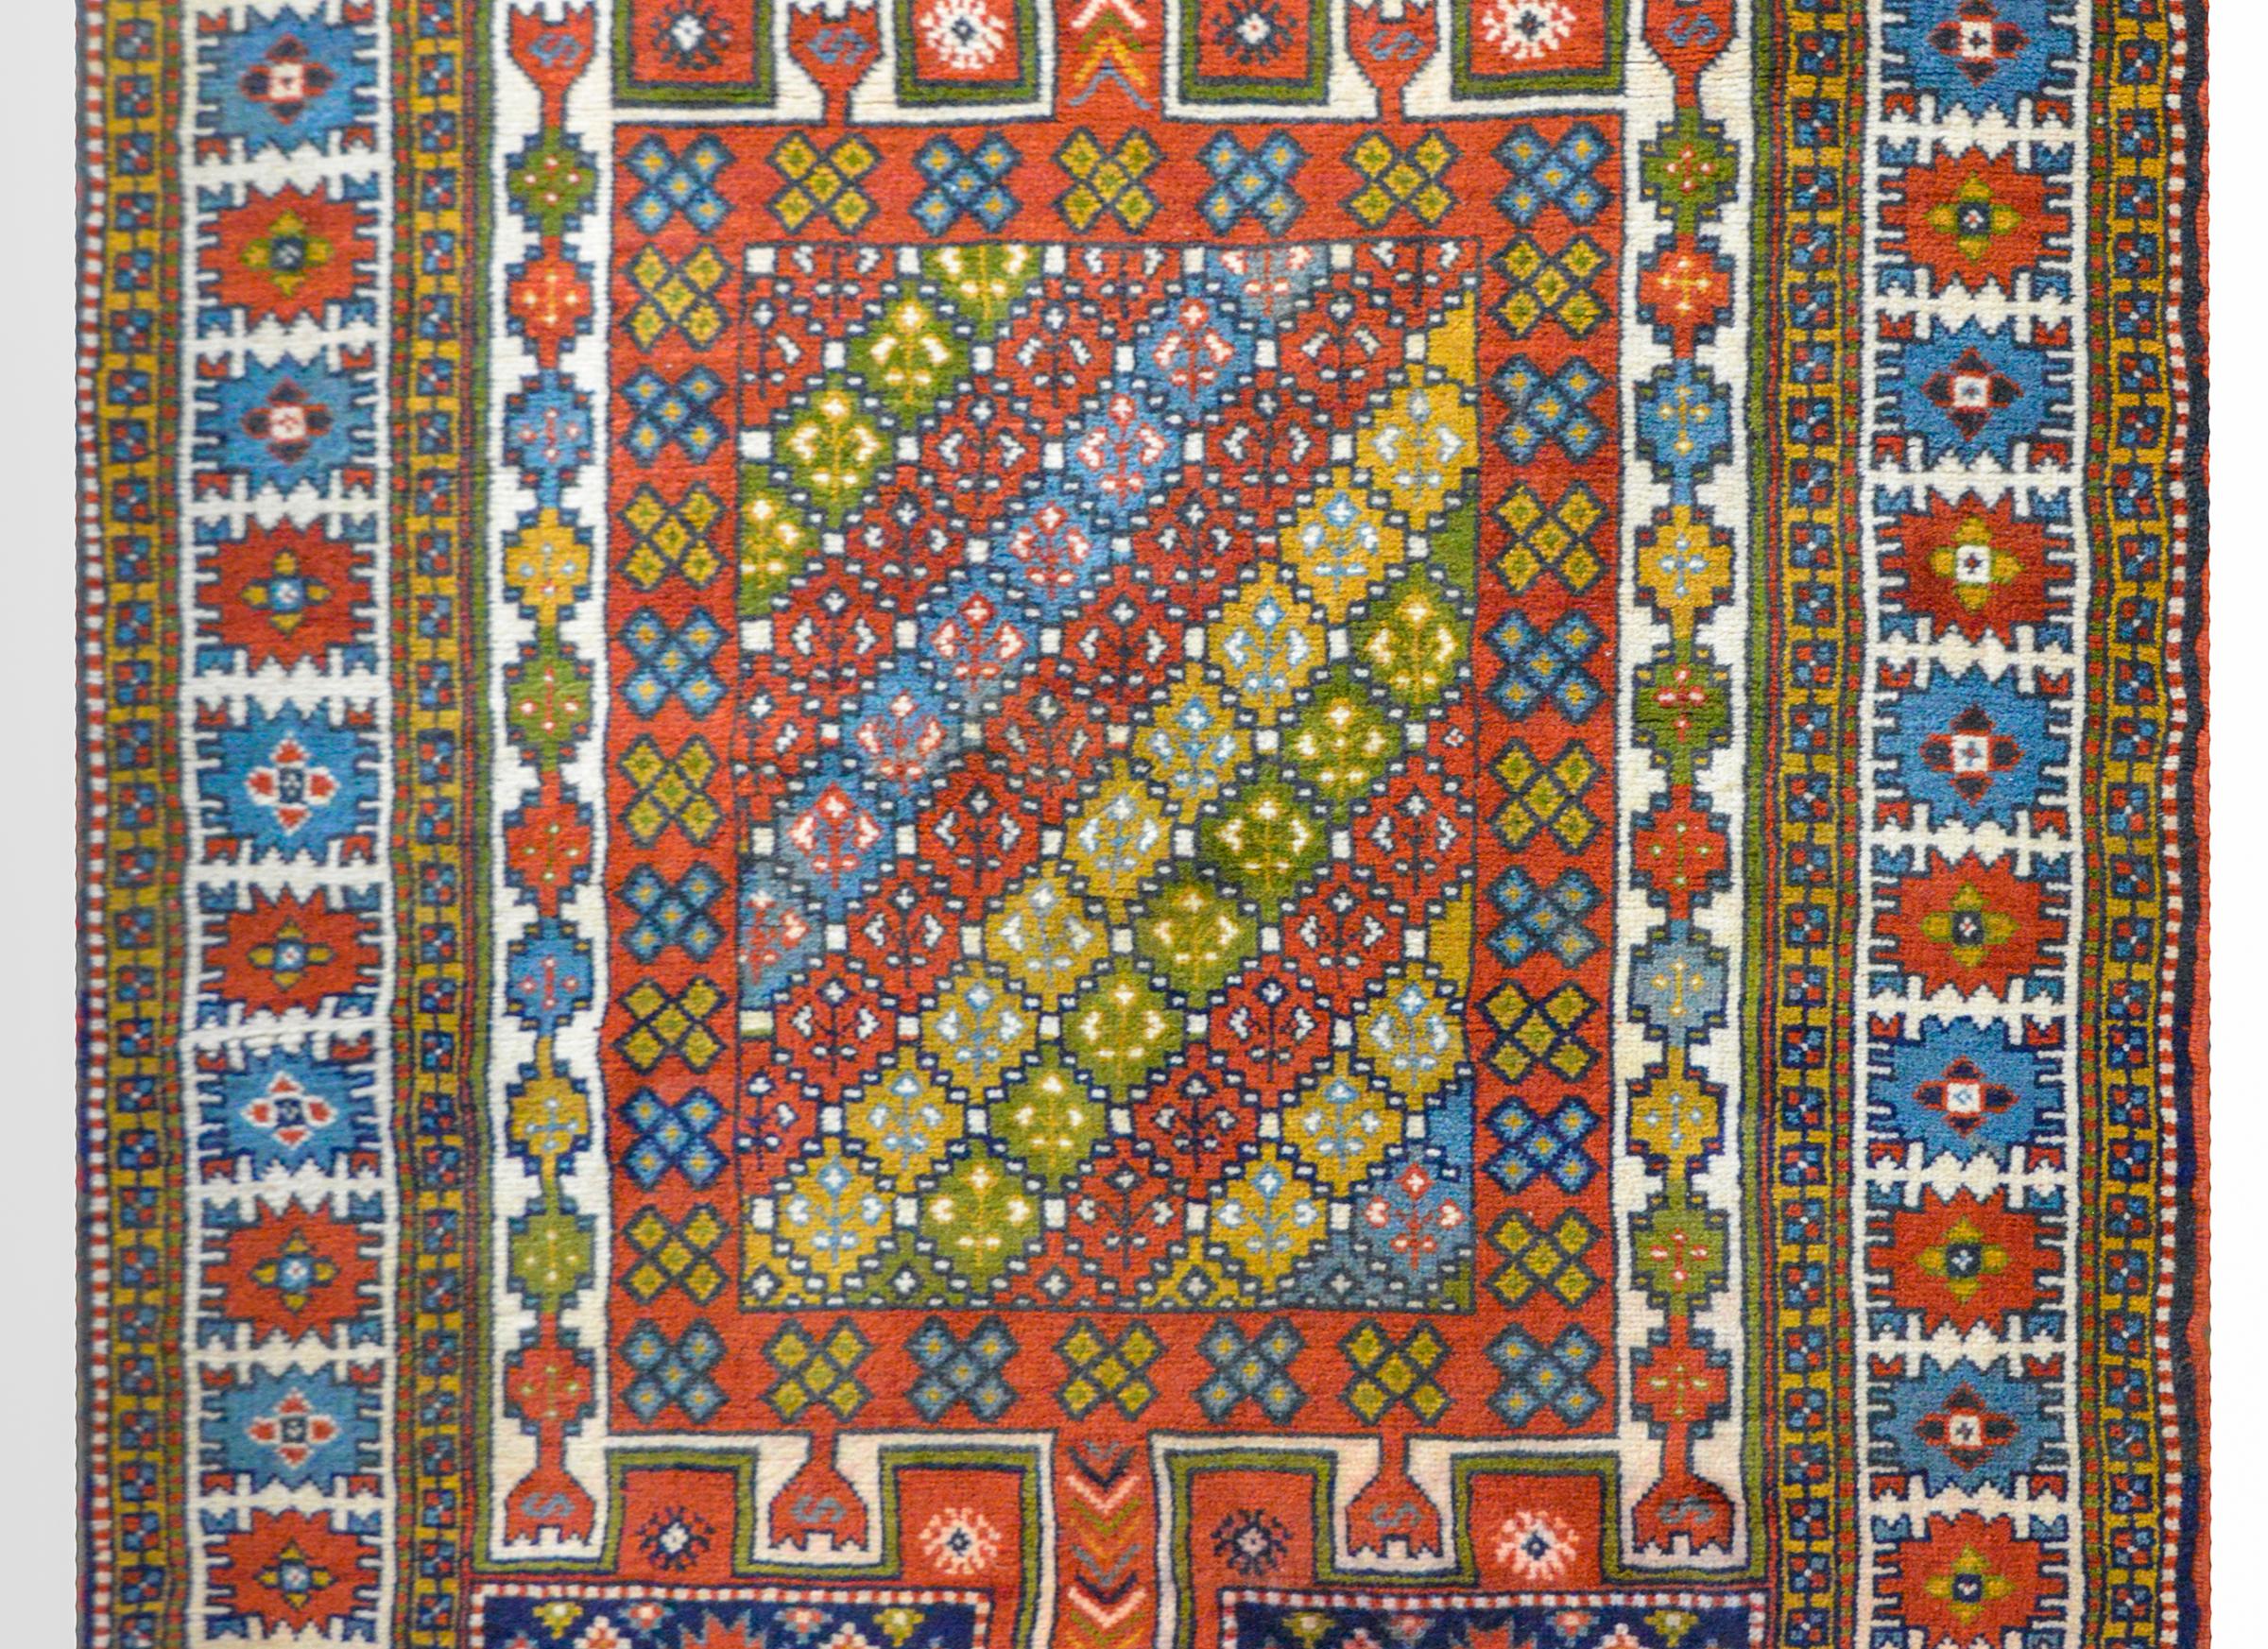 An Anatolian Turkish prayer rug with a fantastic stylized floral and geometric pattern woven in myriad primary colors including indigo, crimson, gold, and green, against a white background. The border is wonderful with a large stylized floral